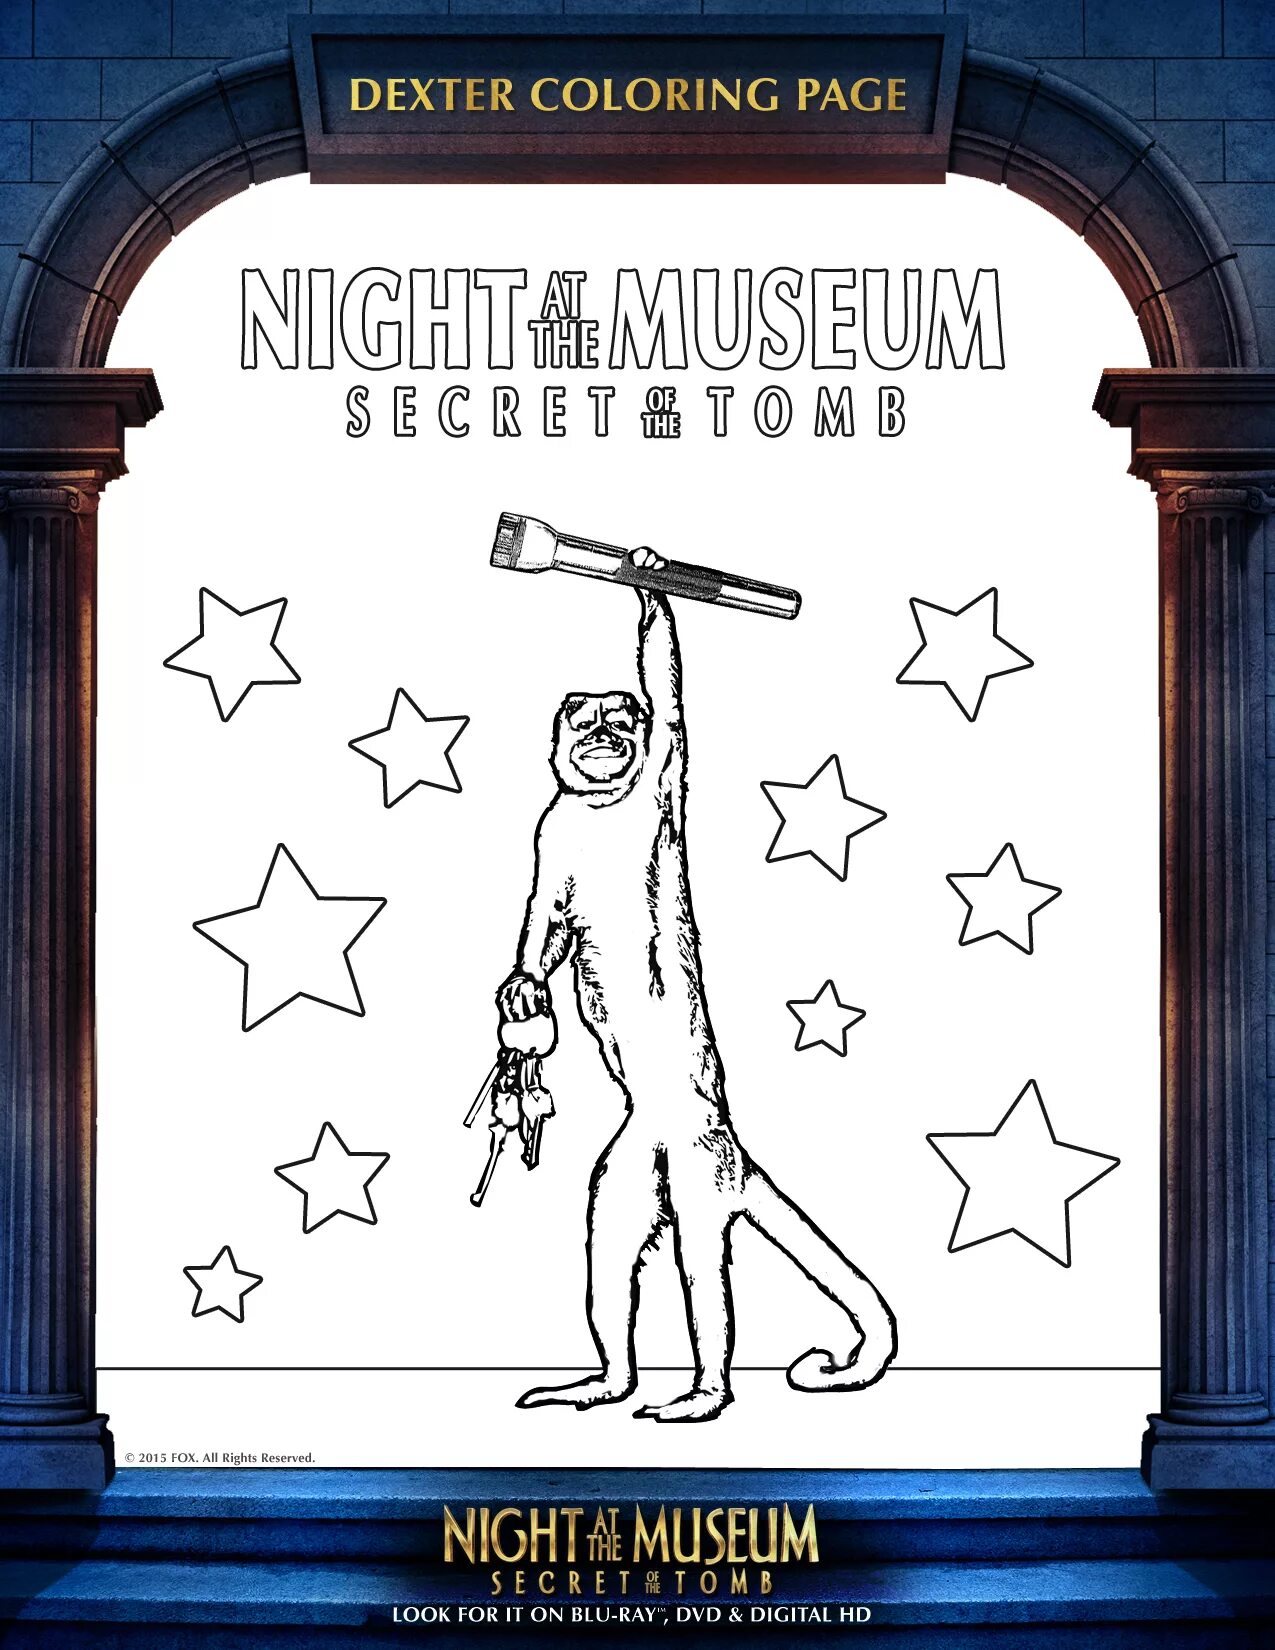 Night at the museum #2